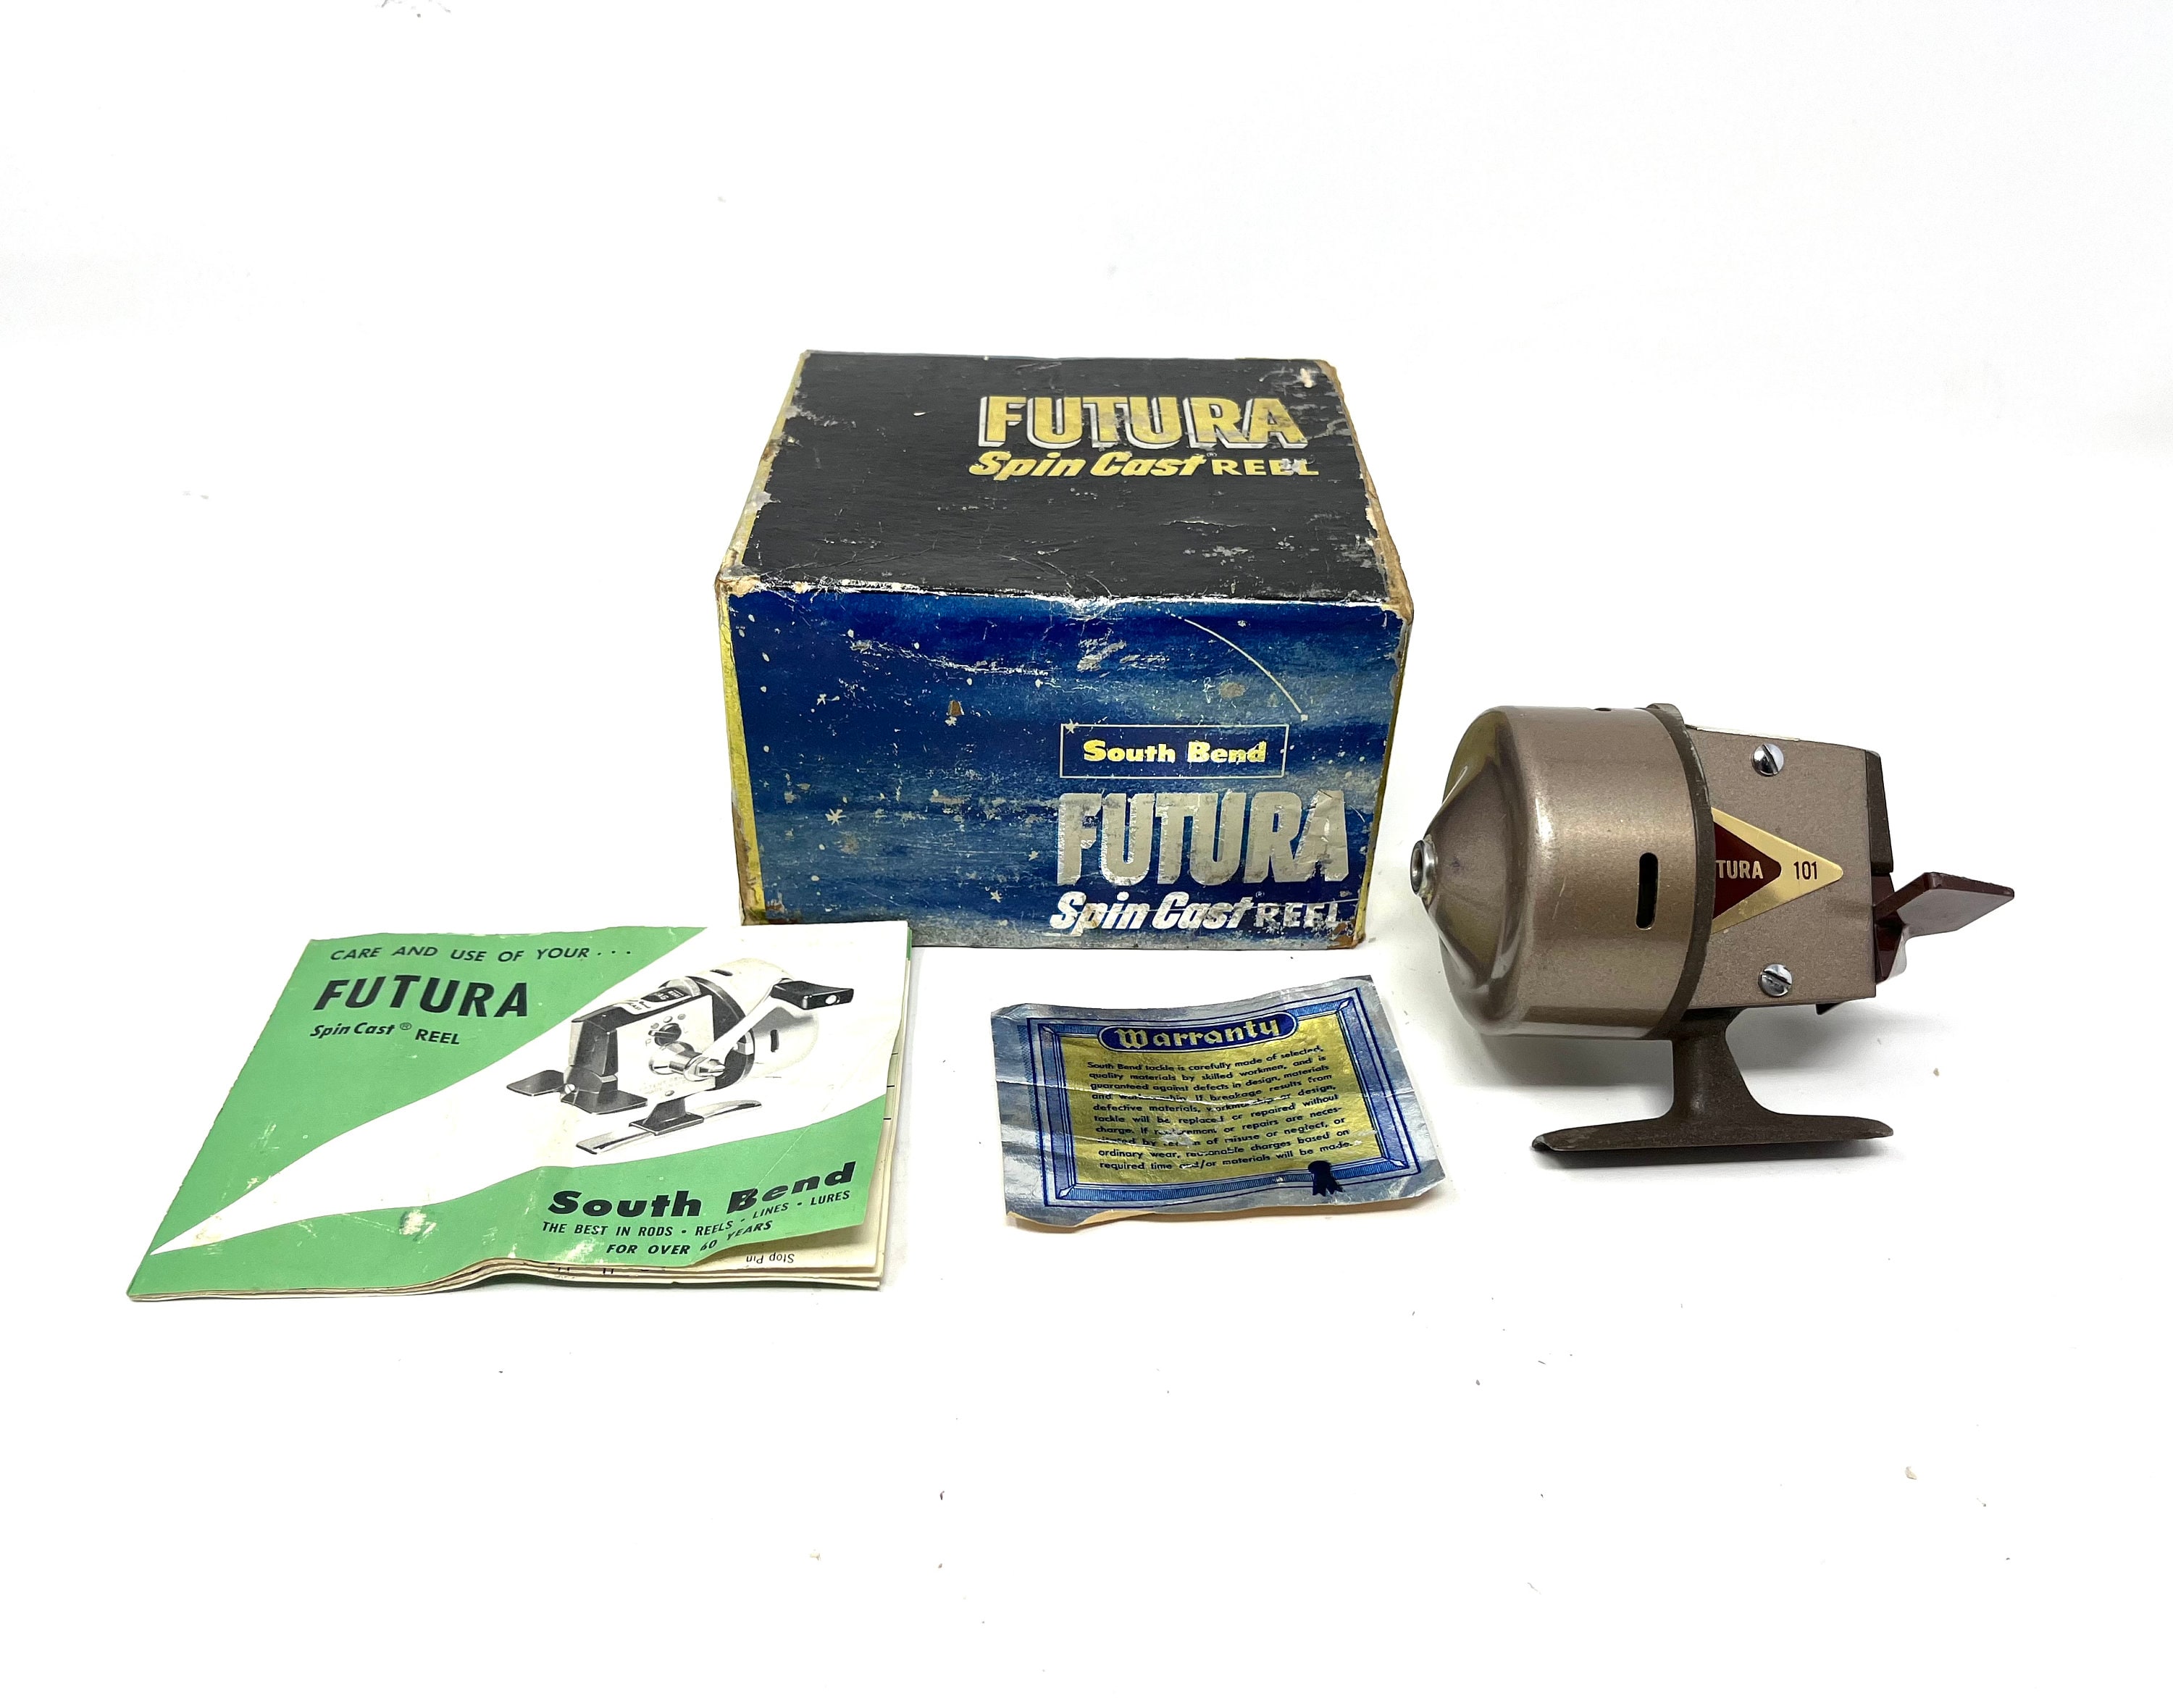 Vintage South Bend Futura 101 Spinning Reel with Box / Antique Fishing Reel  South Bend Future 101